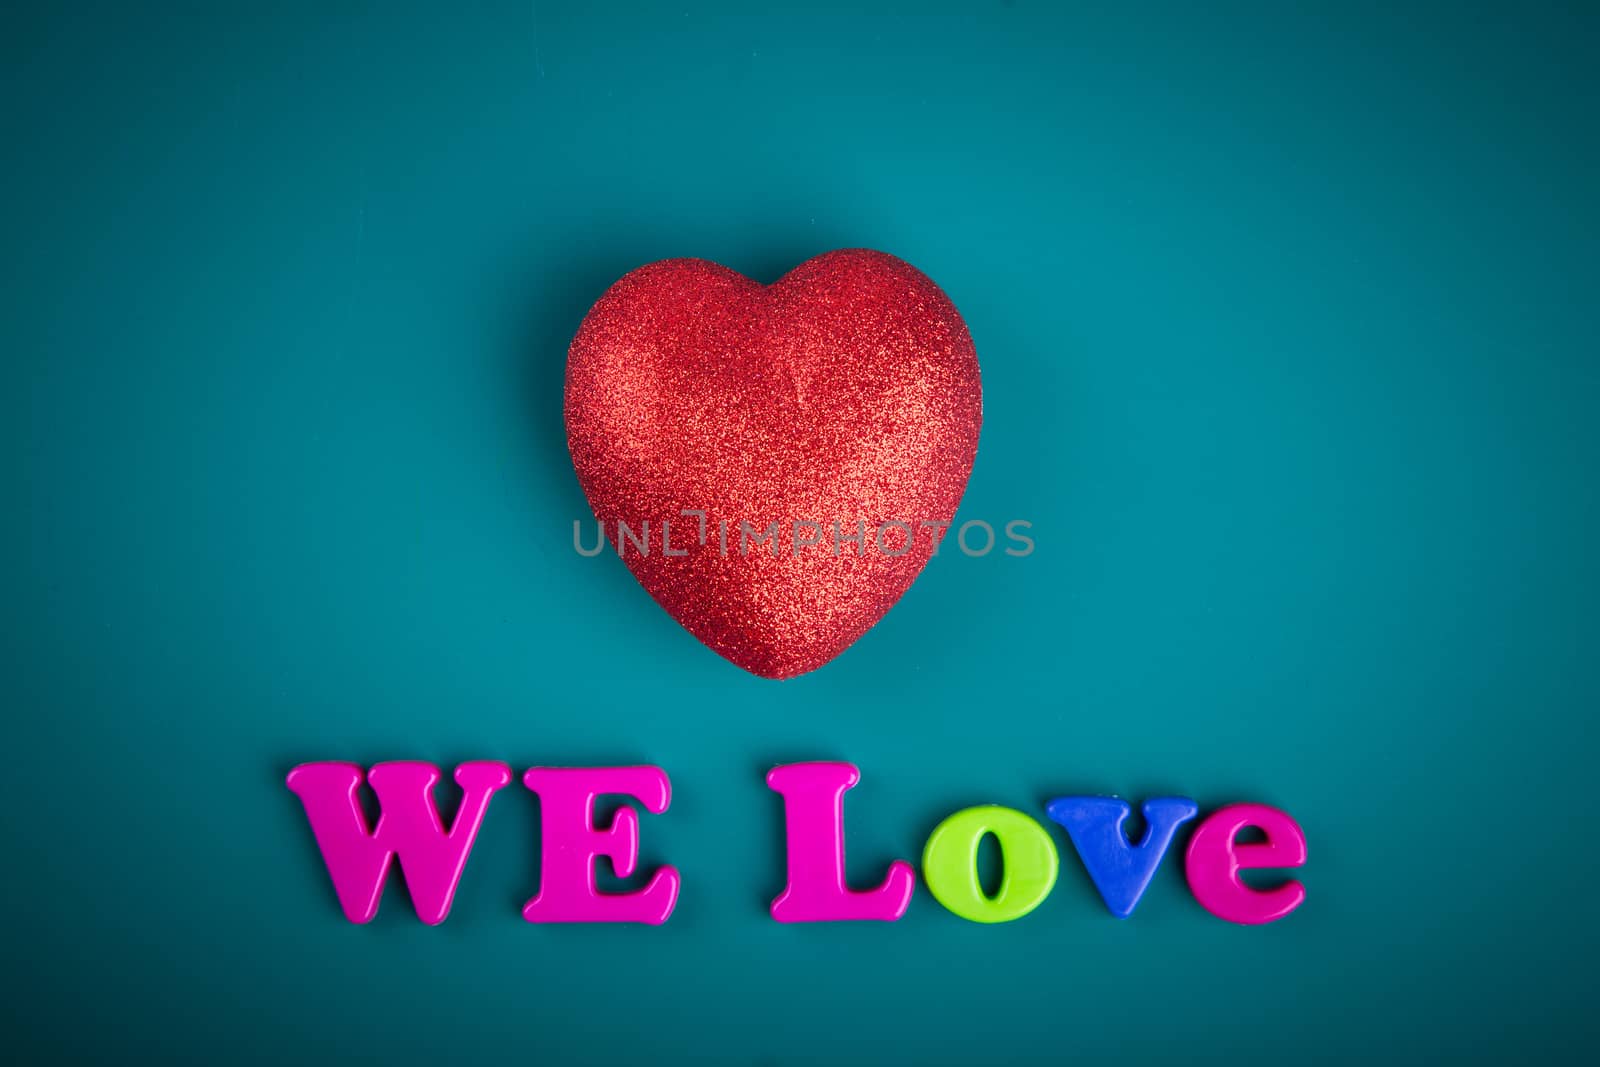 Love hearts on greeen background